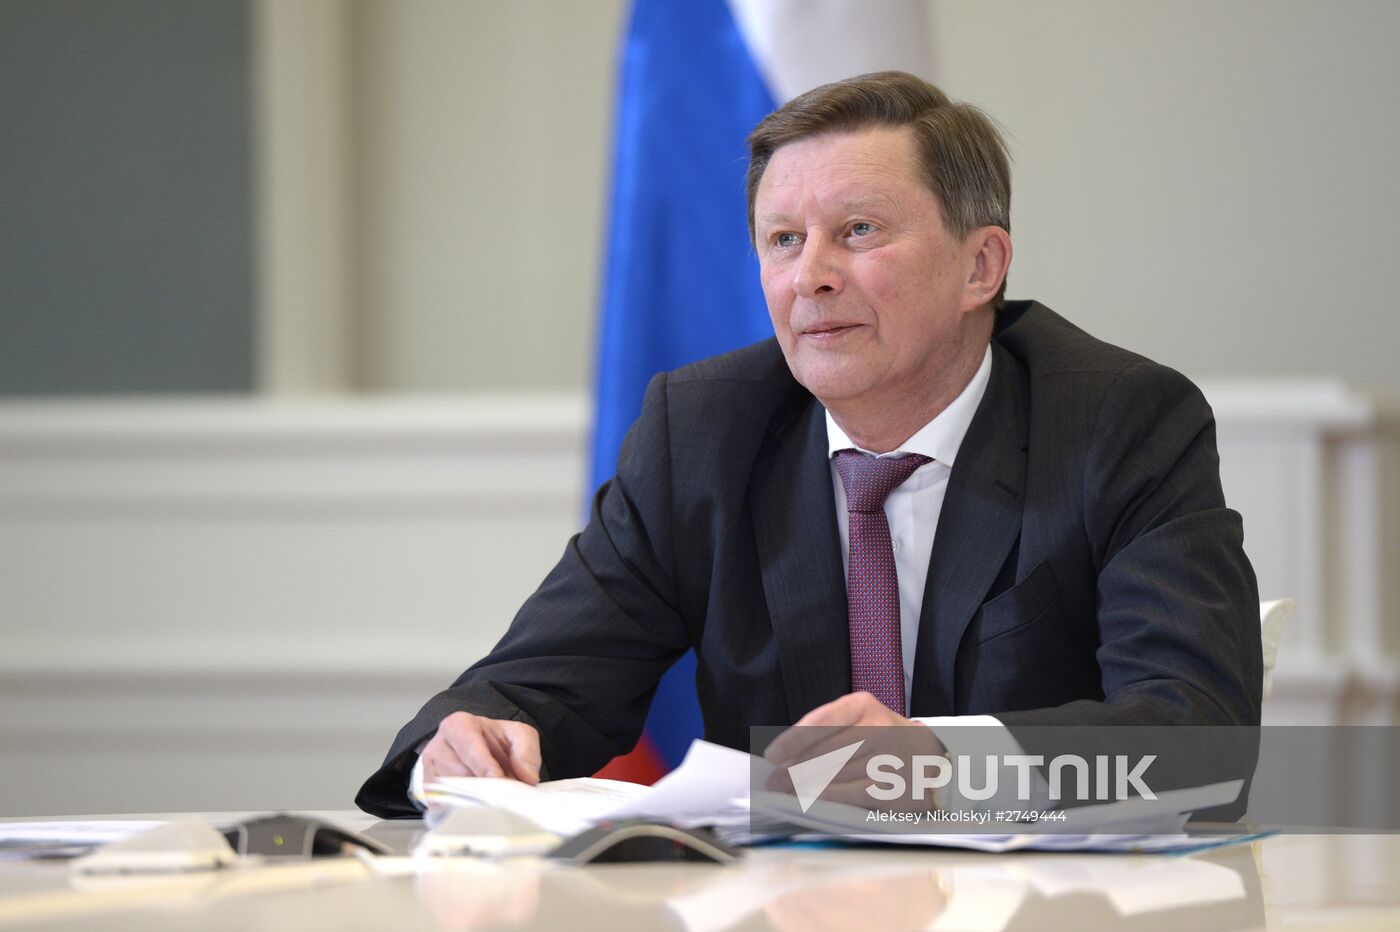 Chief of Staff of Presidential Executive Office Sergei Ivanov chairs video conference on Kamchatka airport construction